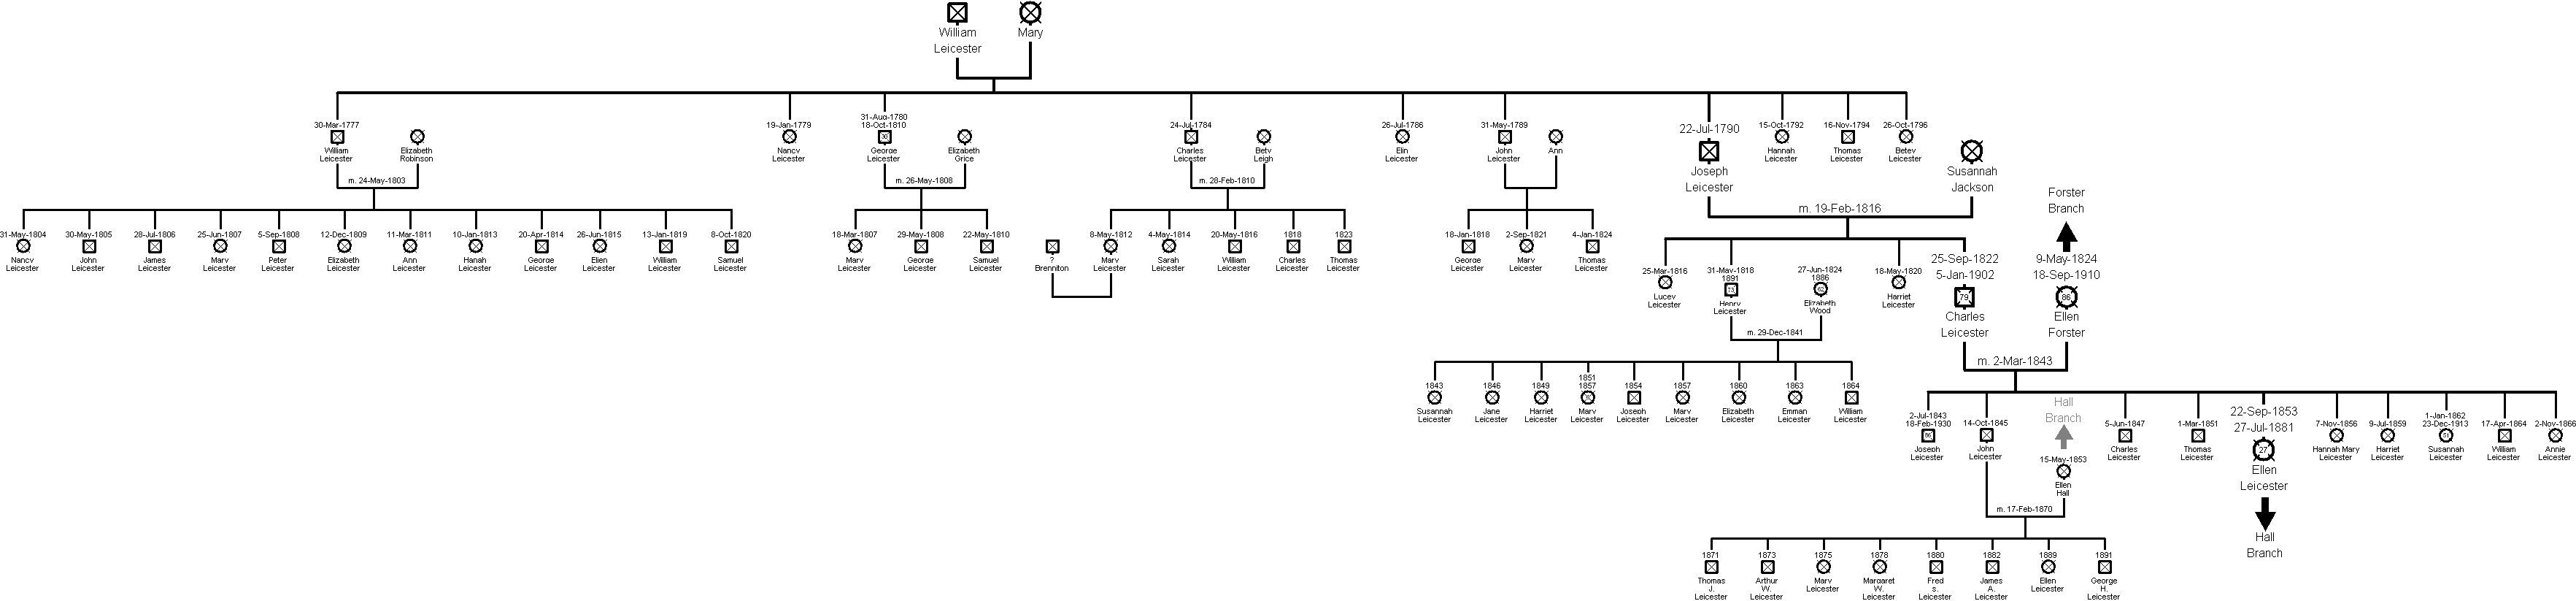 Family Tree of the Leicester Branch